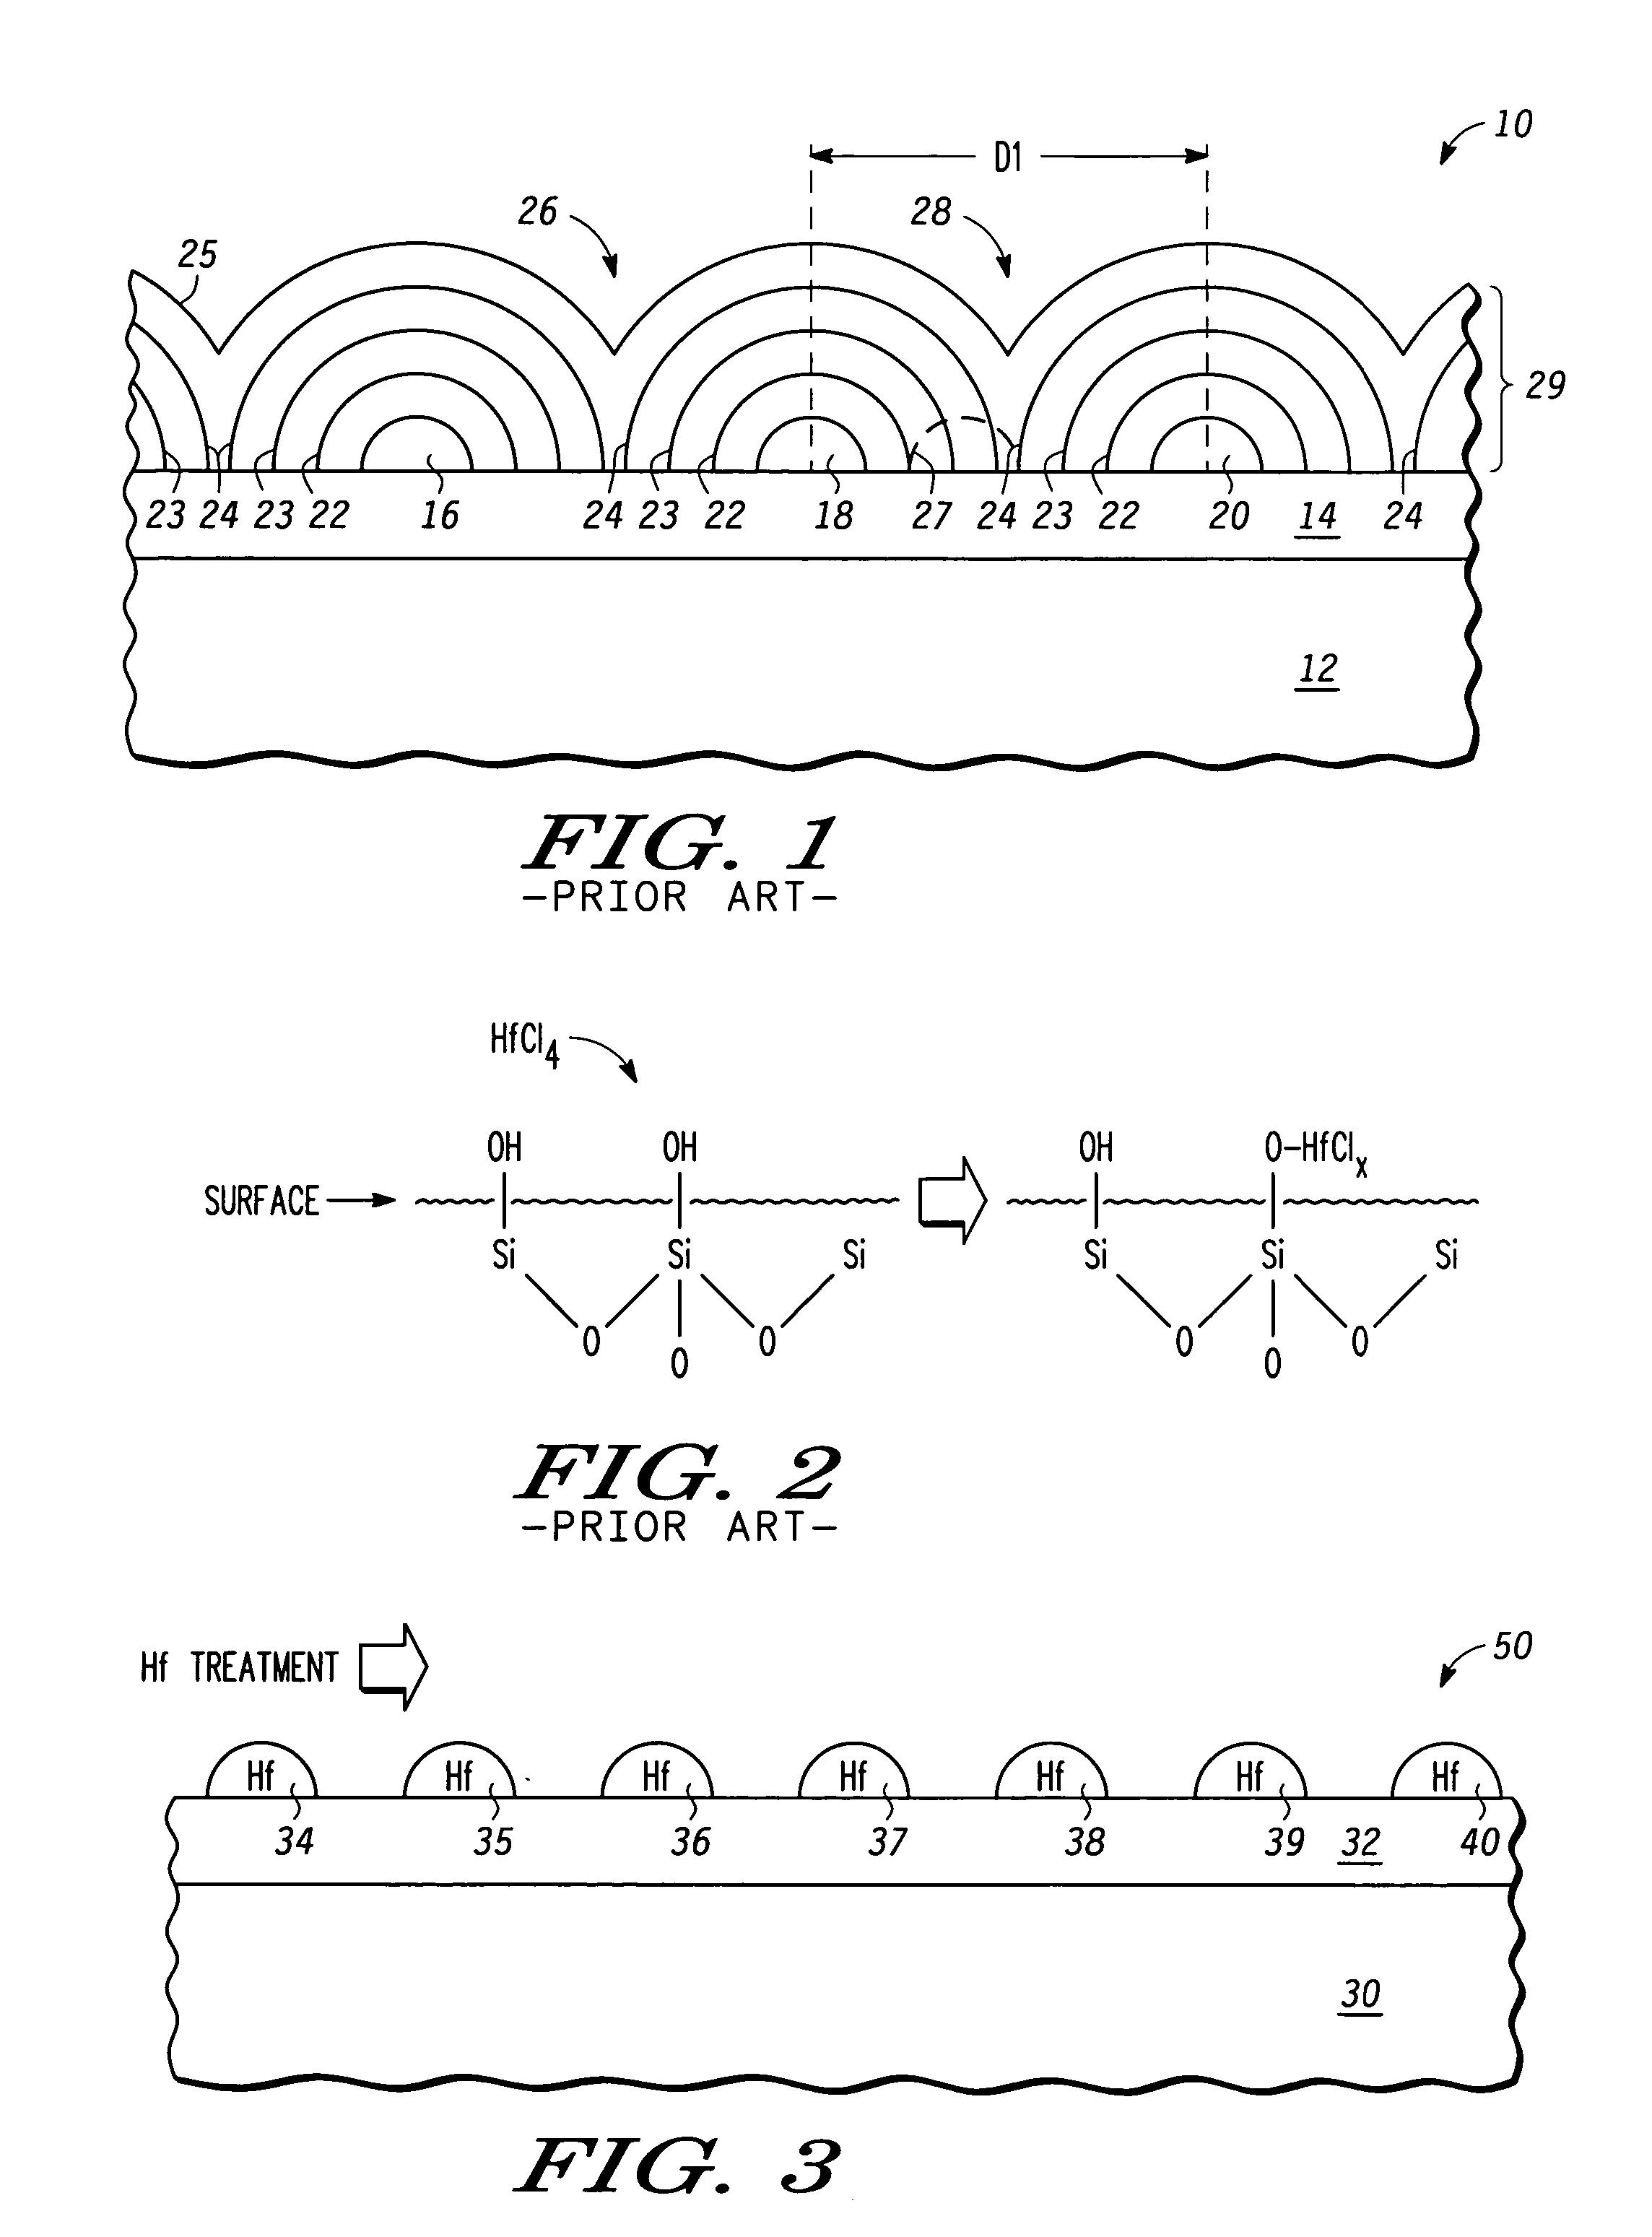 Method for treating a semiconductor surface to form a metal-containing layer